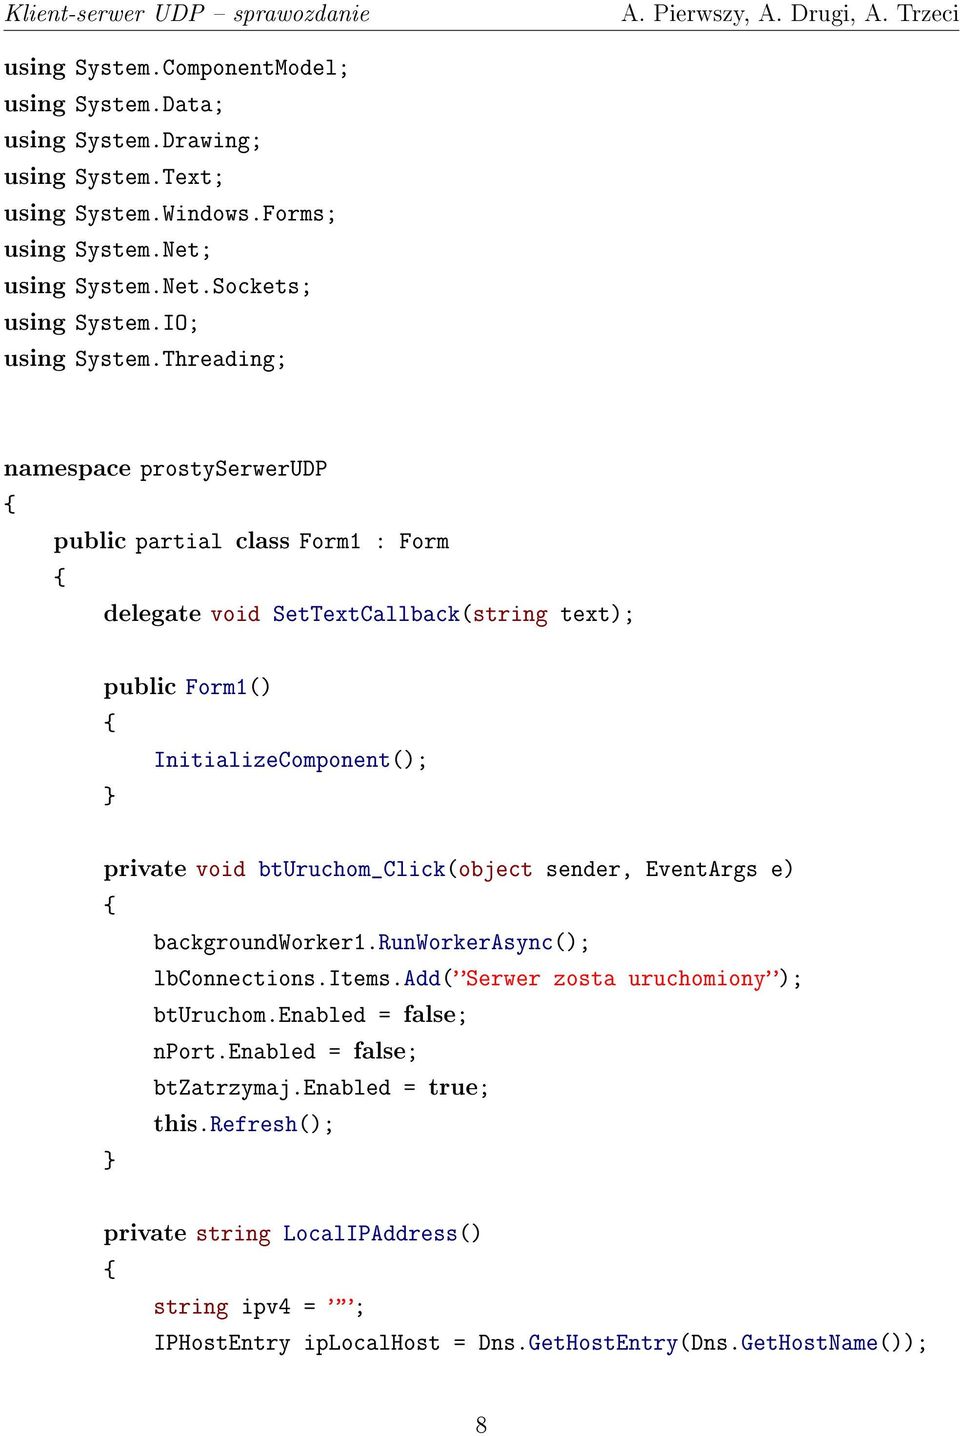 Threading; namespace prostyserwerudp public partial class Form1 : Form delegate void SetTextCallback(string text); public Form1() InitializeComponent(); private void